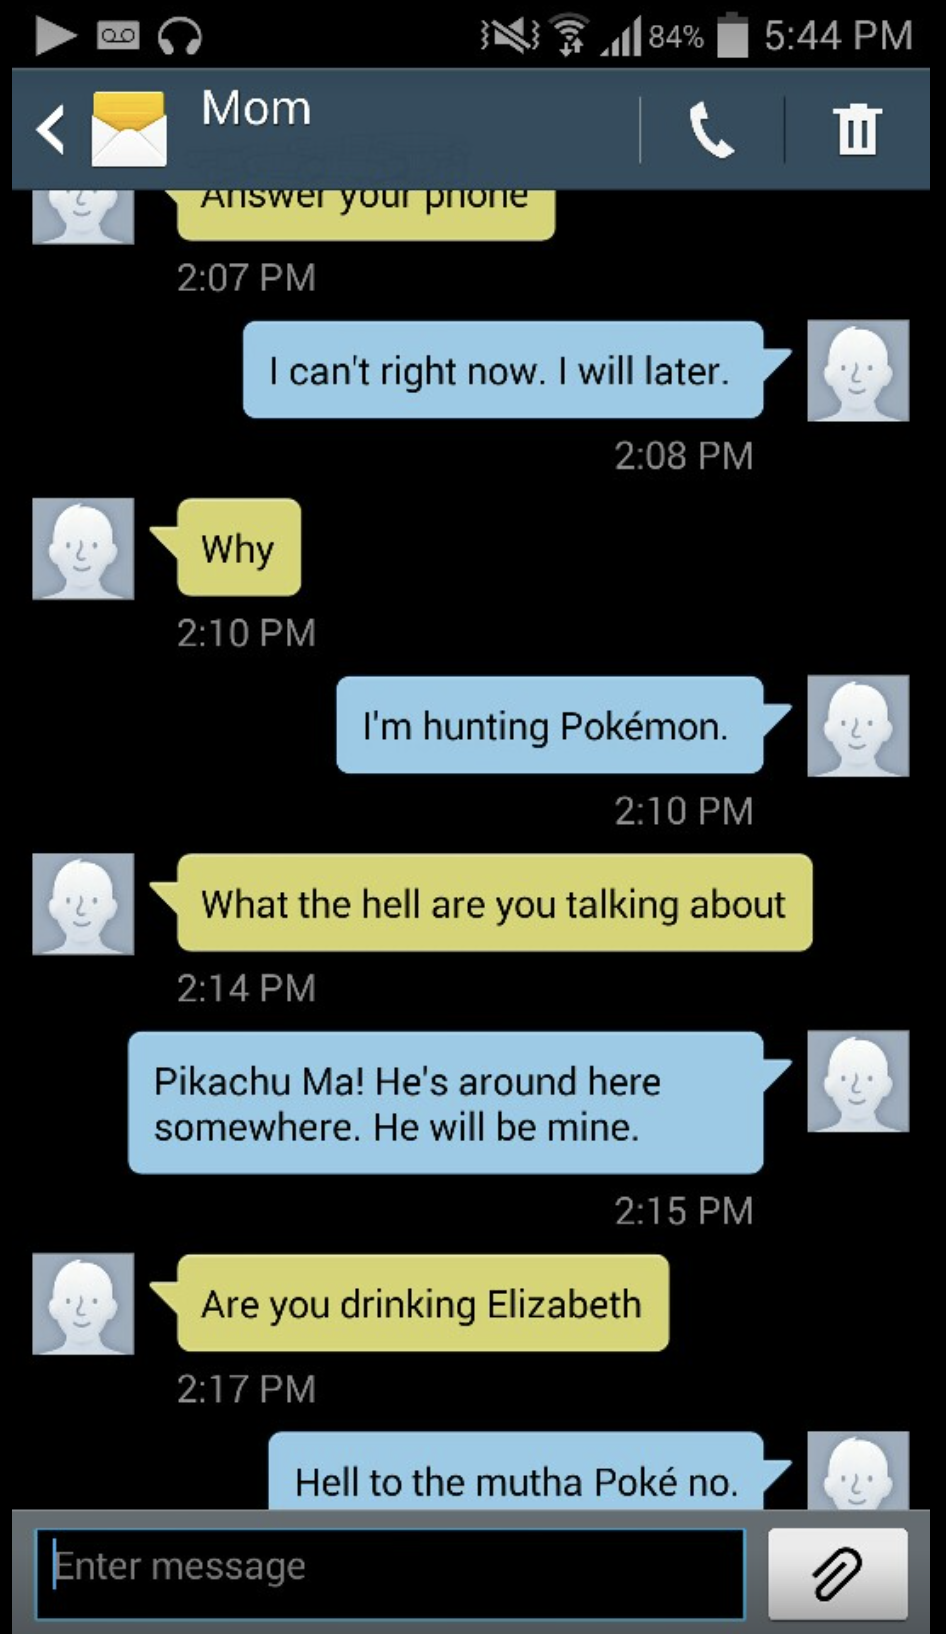 elizabeth and mom text messages - N 1184% Mom Answer your phone I can't right now. I will later. Why I'm hunting Pokmon What the hell are you talking about Pikachu Ma! He's around here somewhere. He will be mine. Are you drinking Elizabeth Hell to the mut